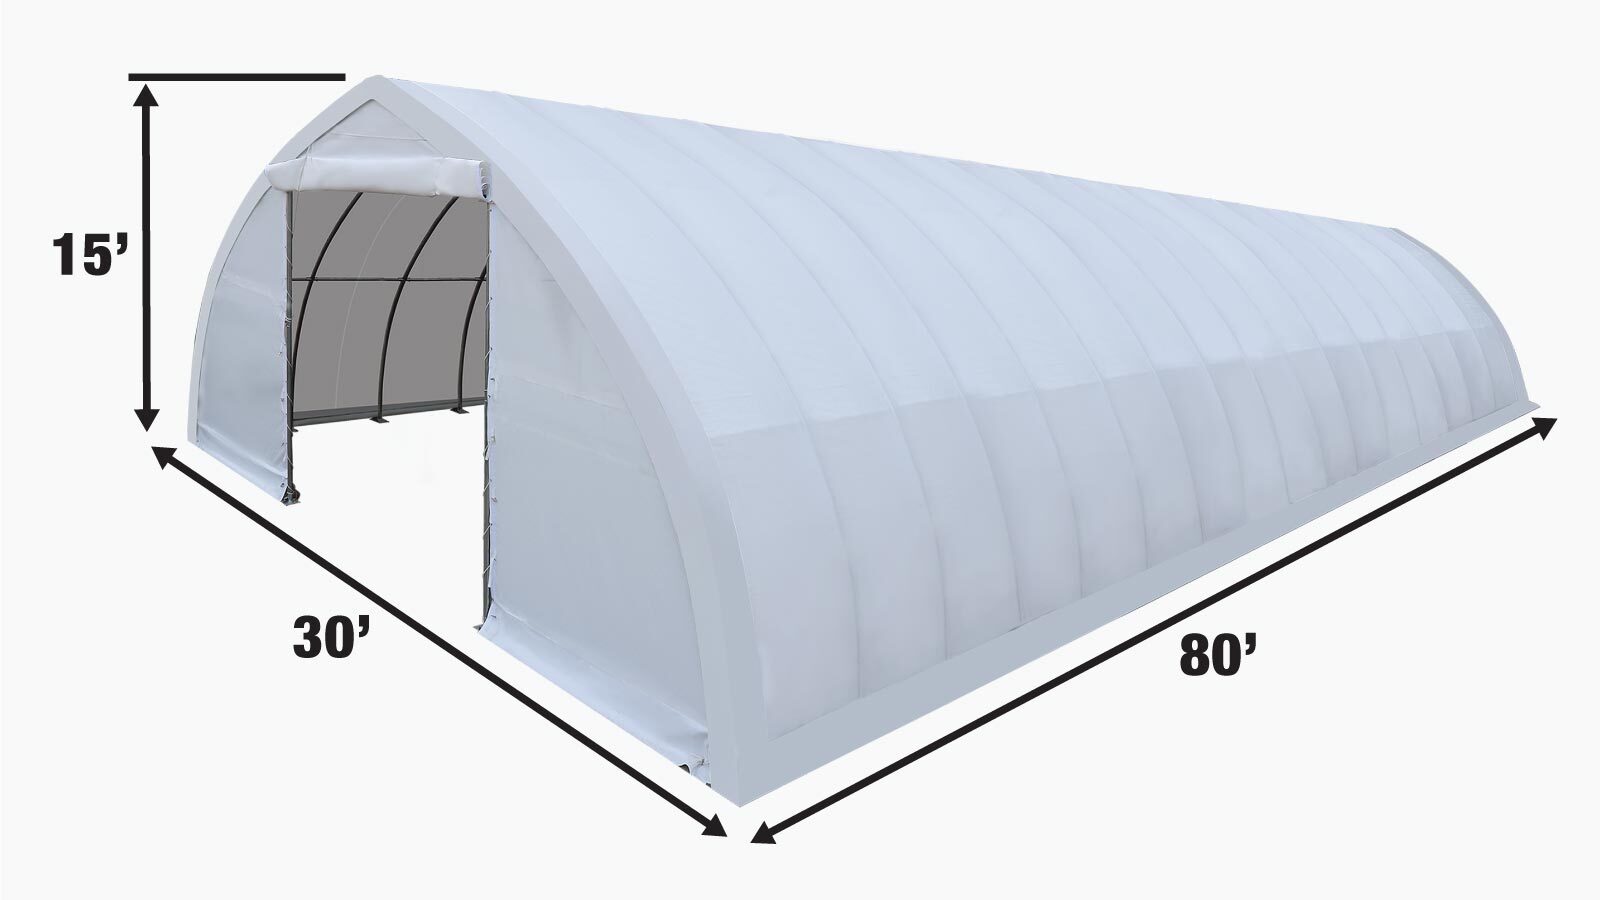 TMG Industrial 30' x 80' Peak Ceiling Storage Shelter with Heavy Duty 17 oz PVC Cover & Drive Through Doors, TMG-ST3080V-specifications-image